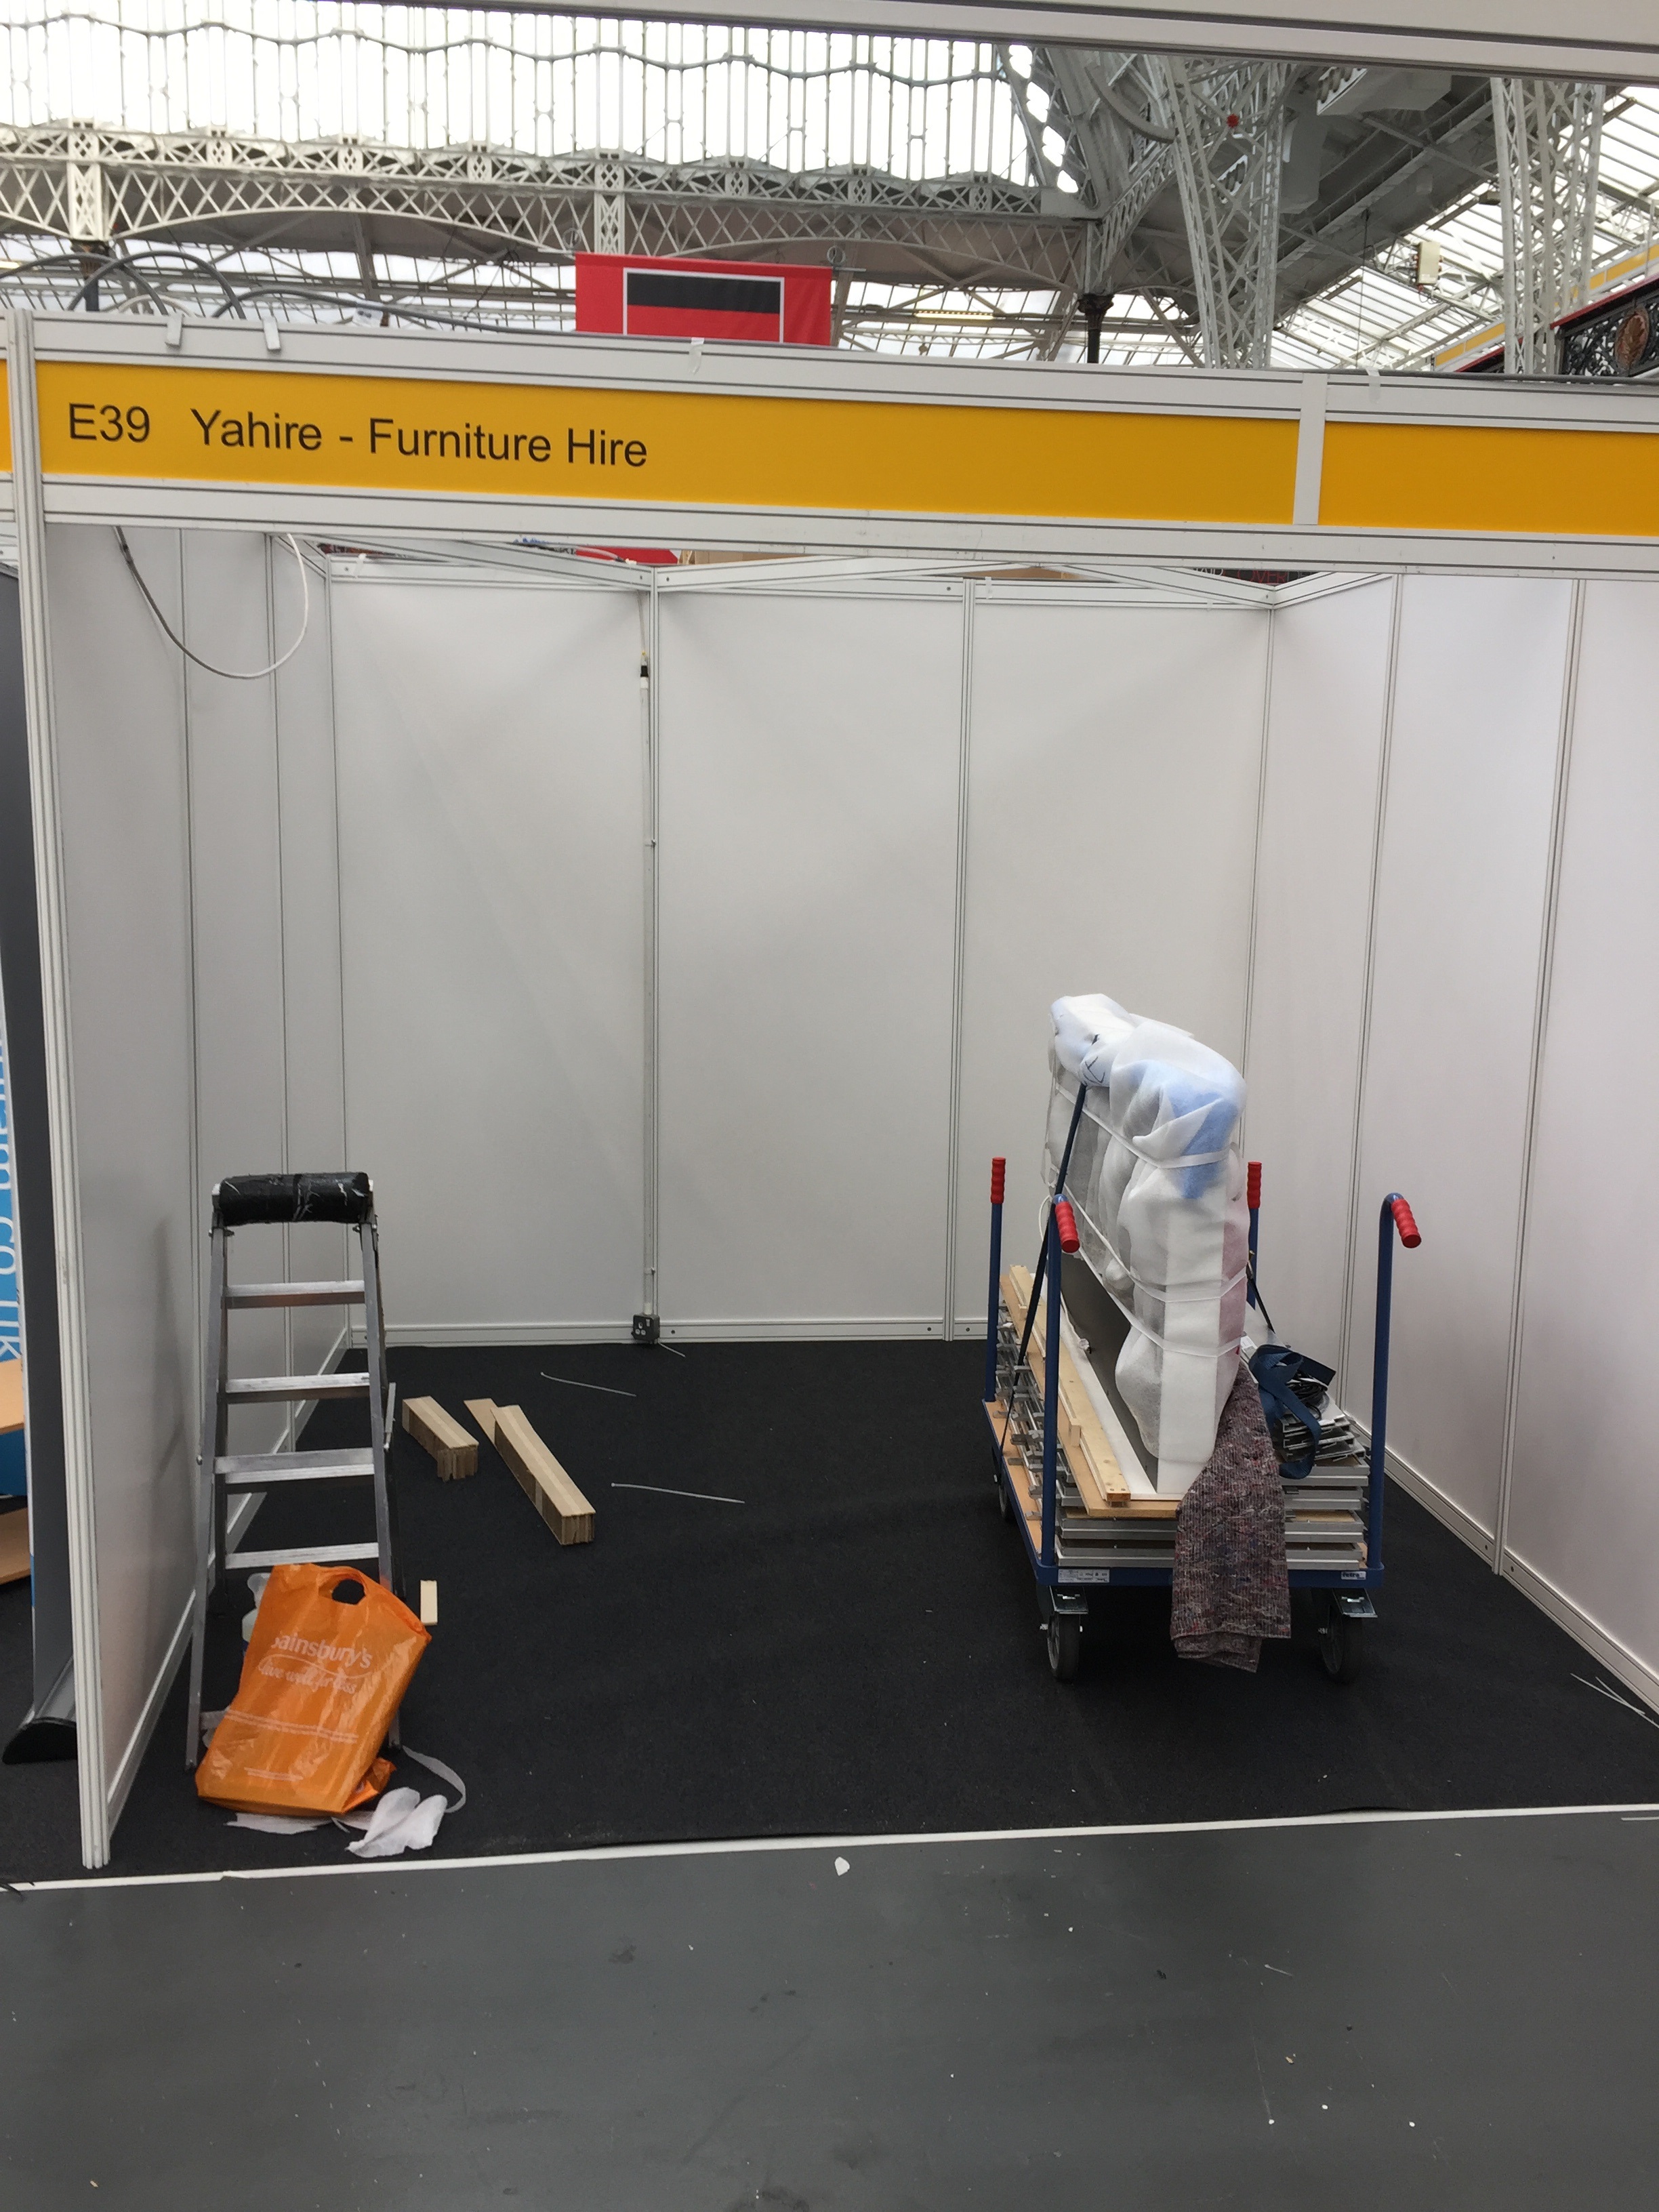 Images of our stand before setup